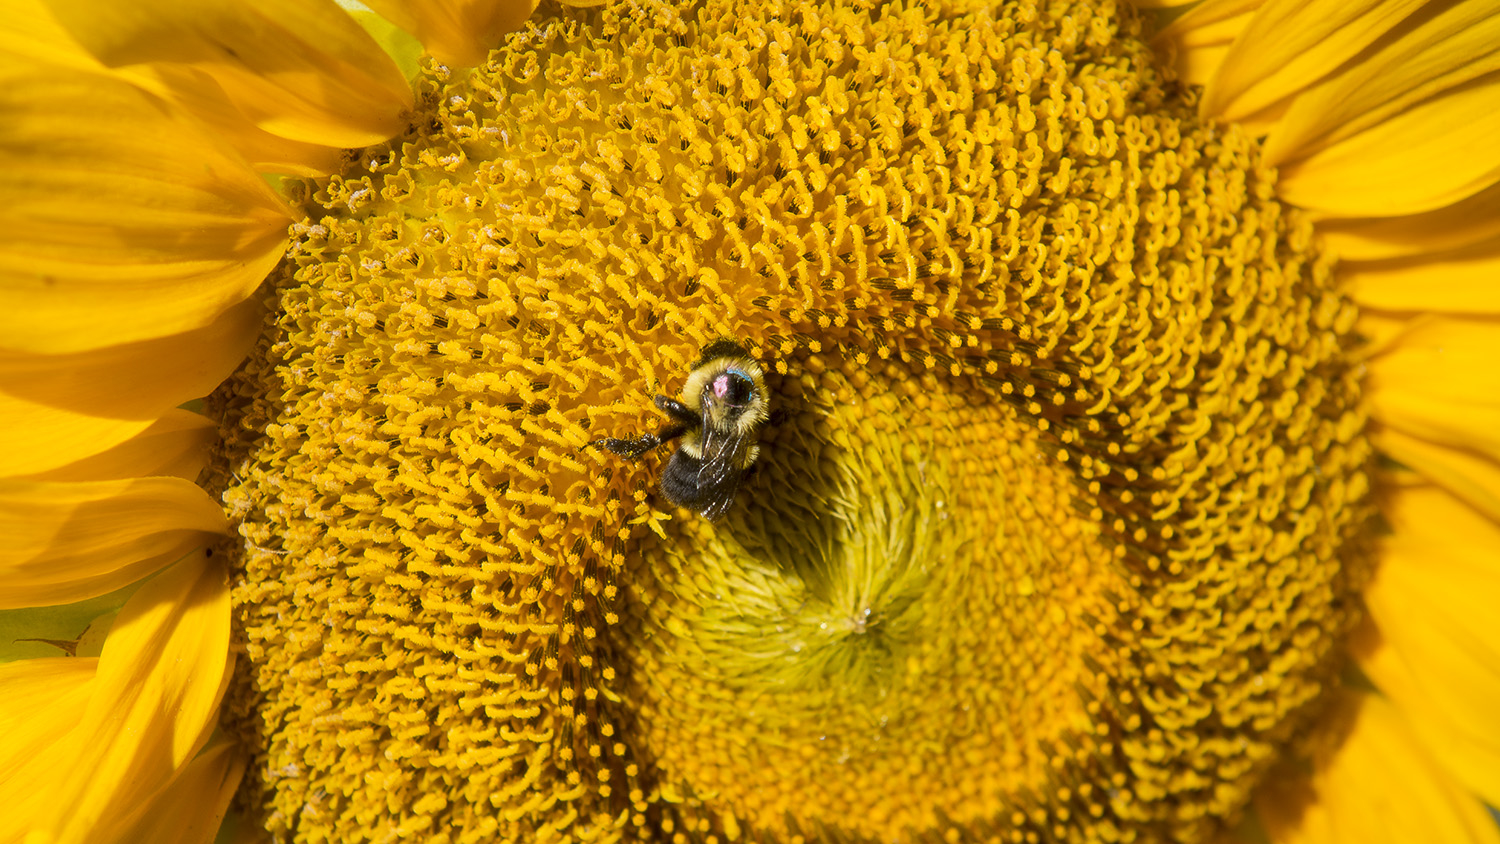 Bumble bee on a sunflower.